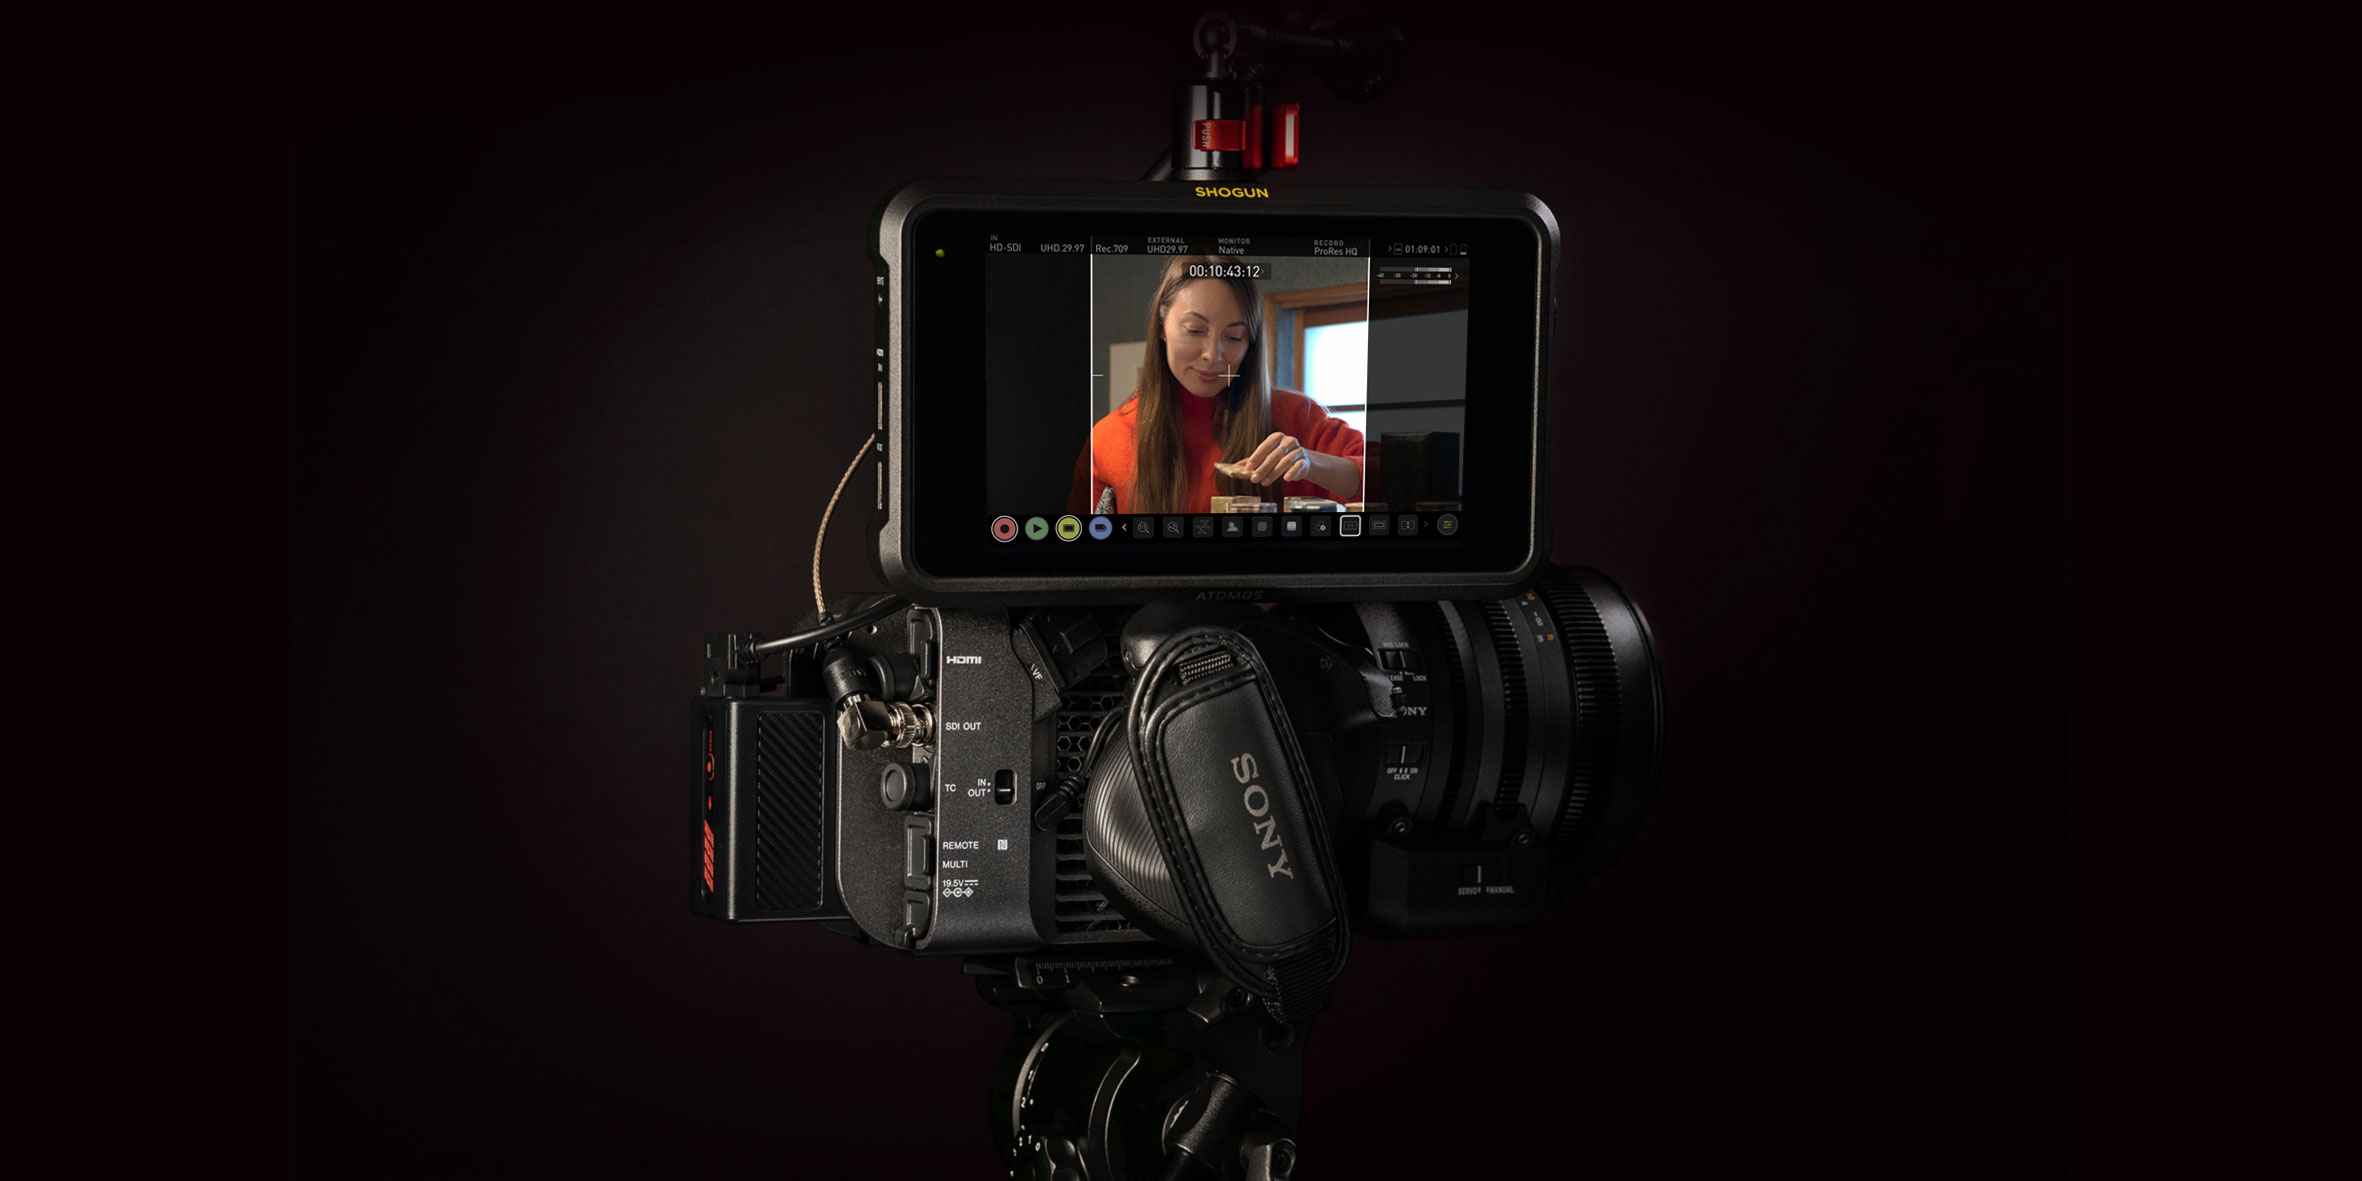 Shogun 7 & the Sony FX6 takes your production to another level